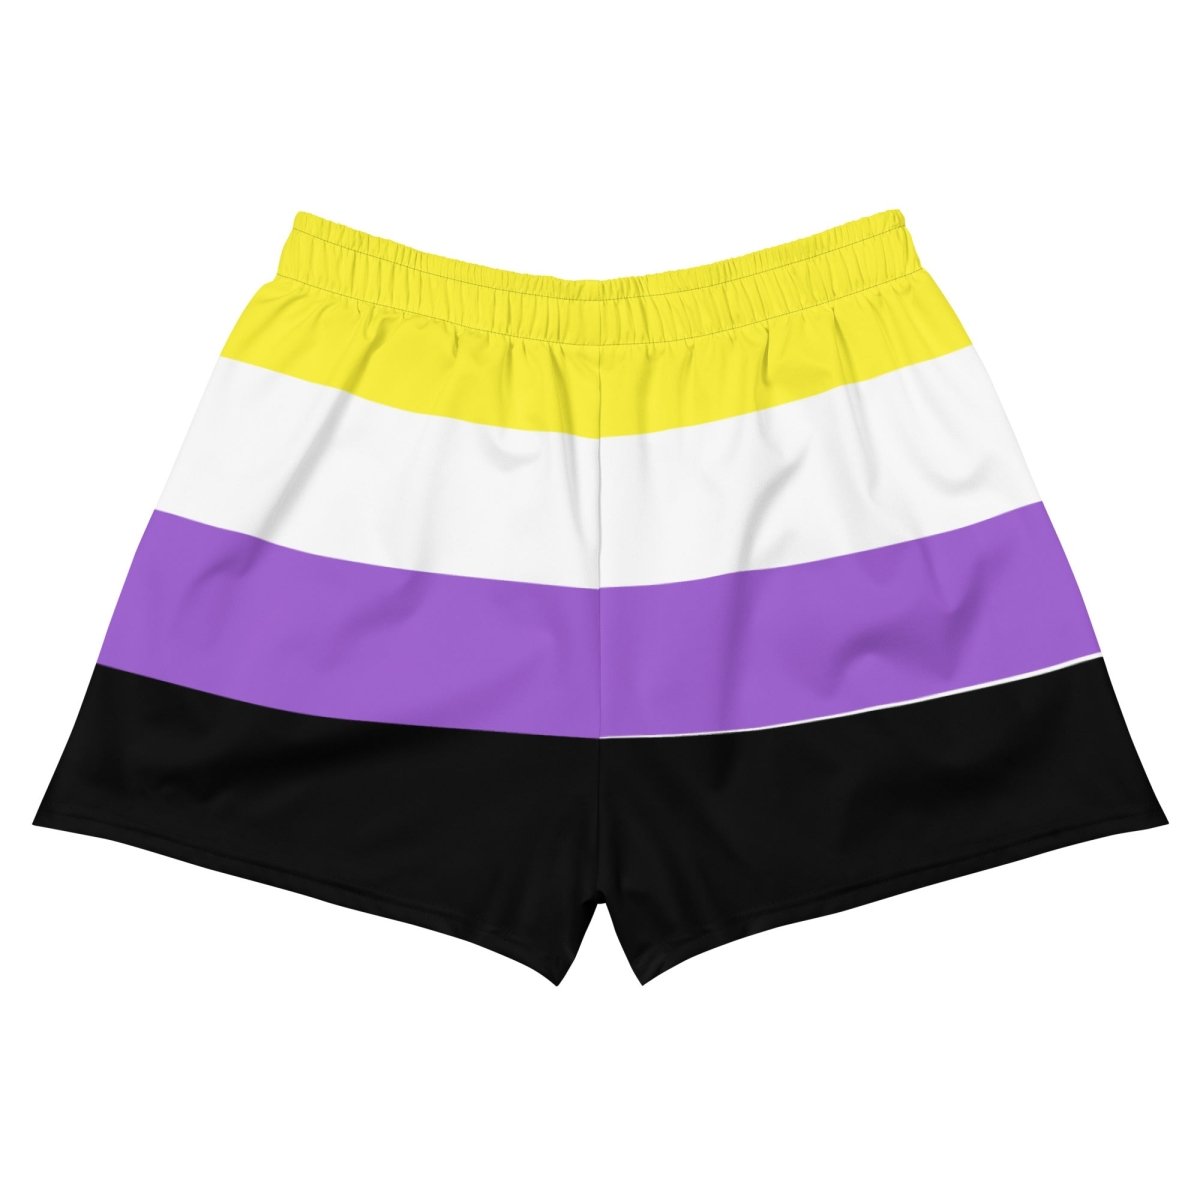 Non-Binary Flag Athletic Shorts - On Trend Shirts